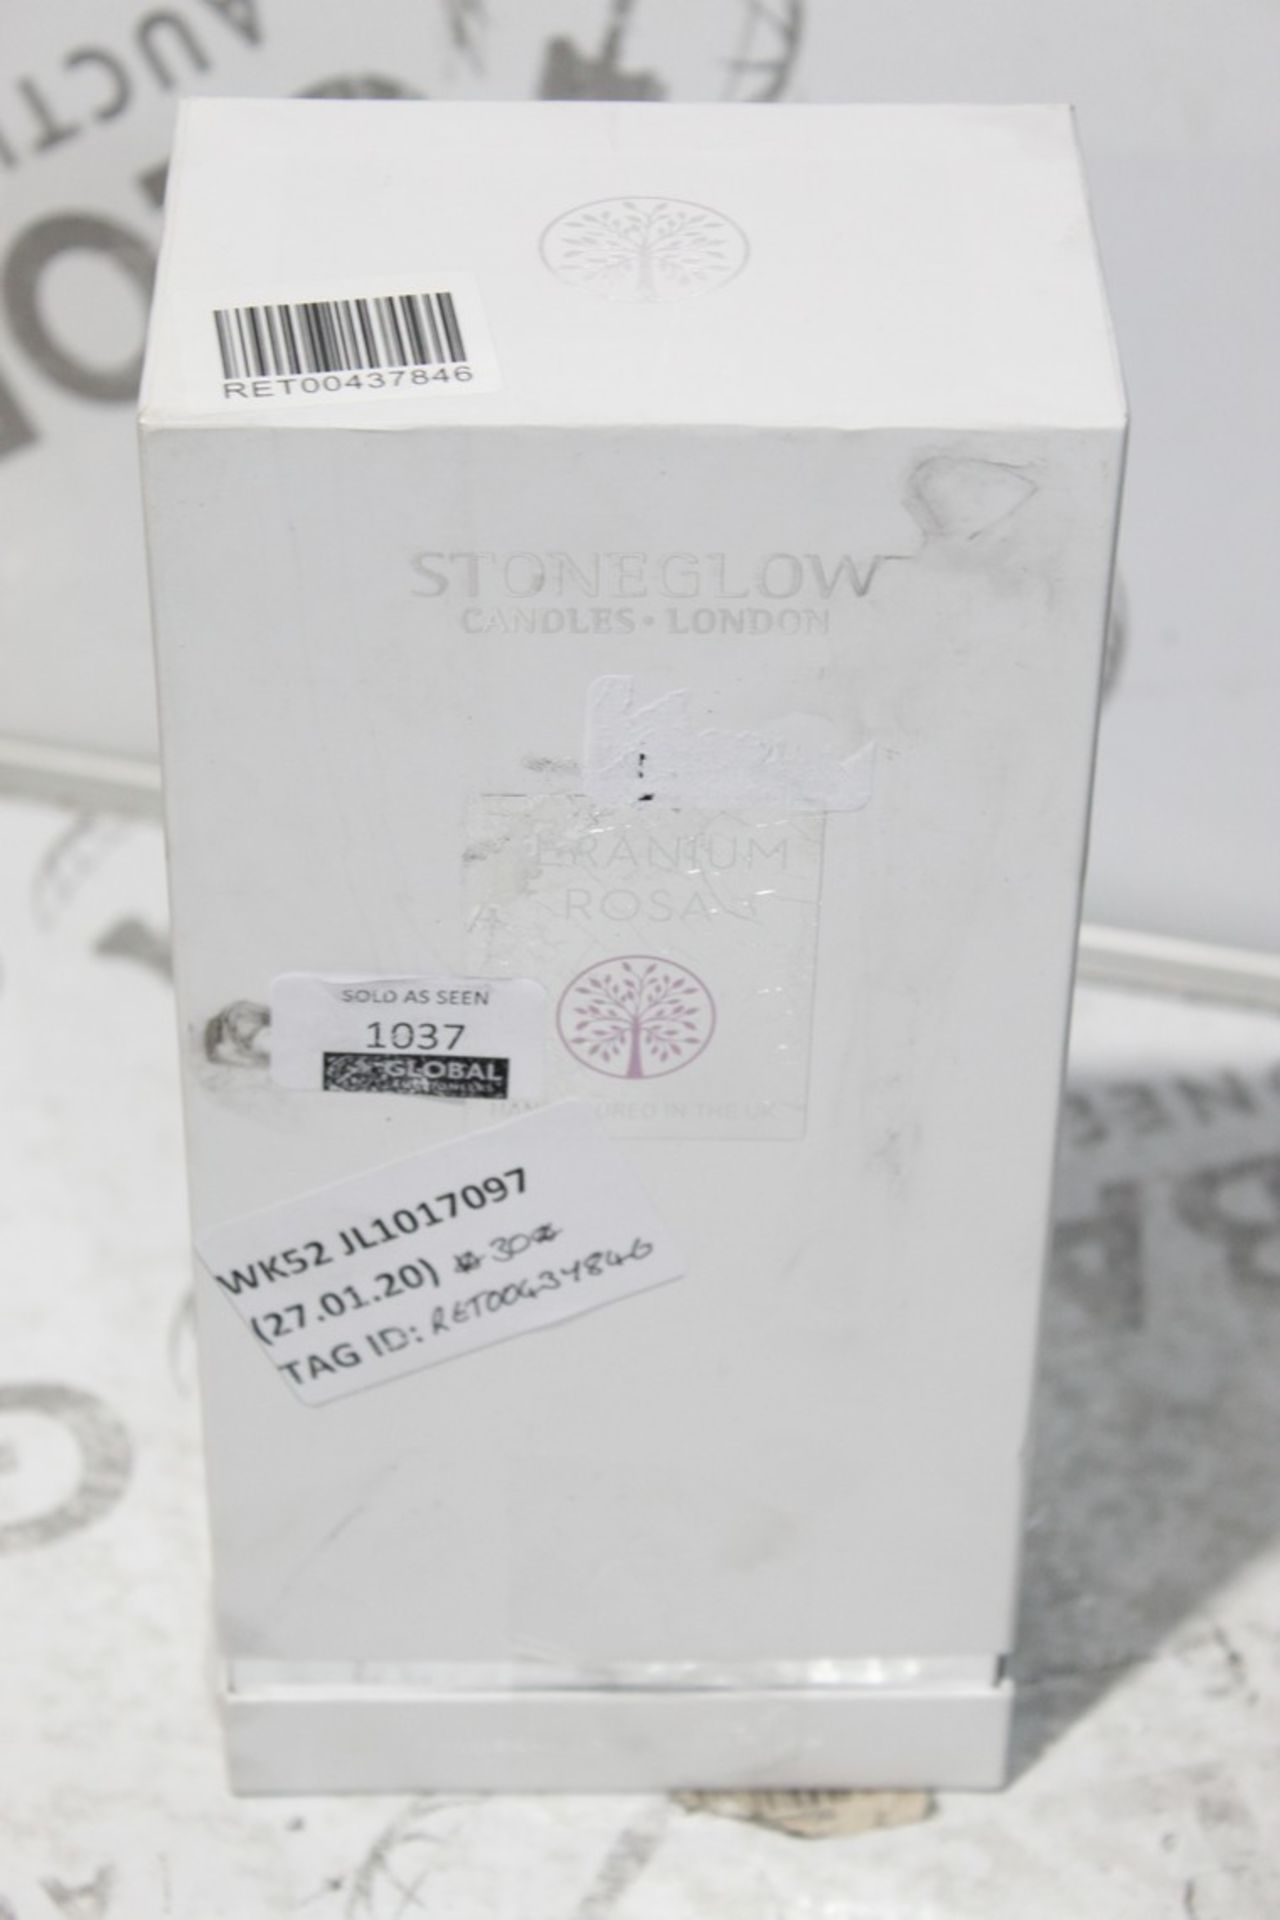 Boxed Stone Glow Scent Diffuser RRP £35 (RET00437846) (Public Viewing and Appraisals Available)